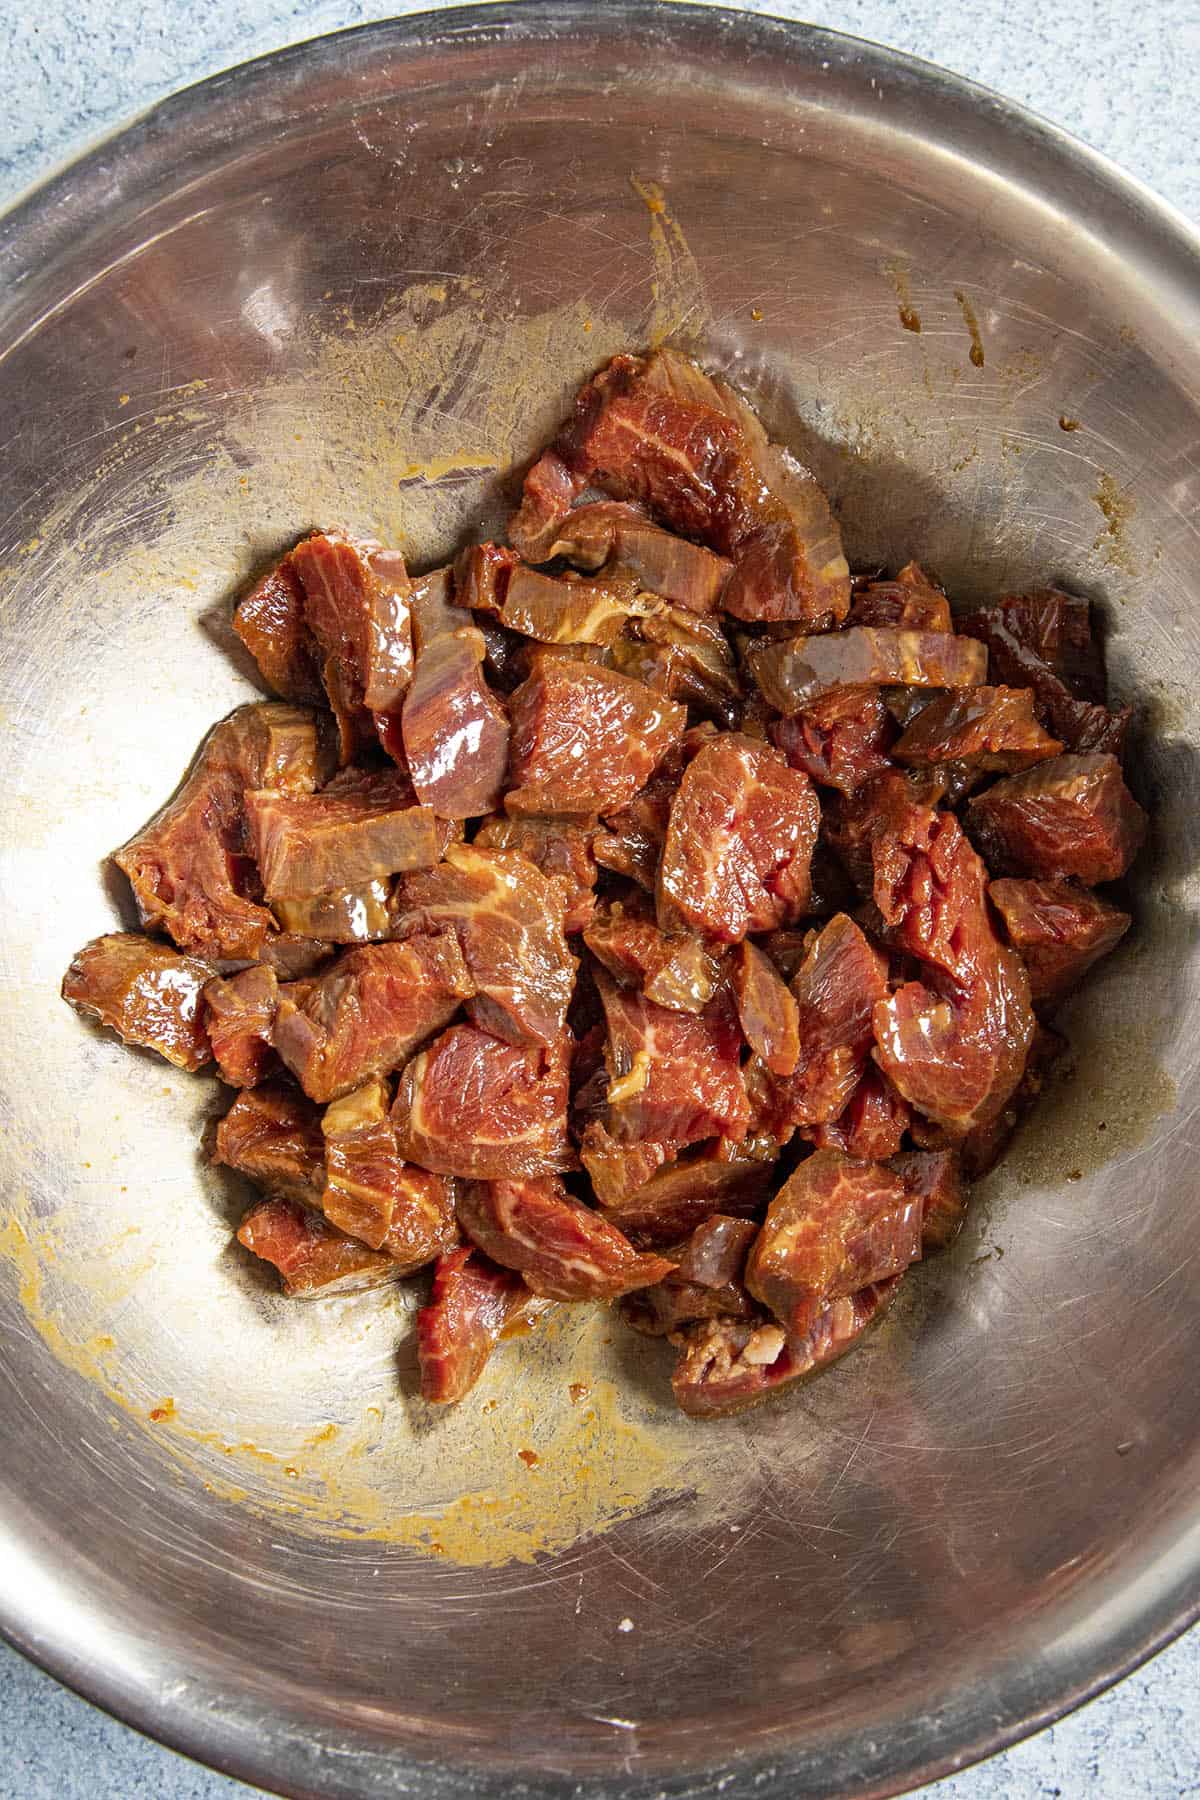 Marinating the chopped beef in a bowl